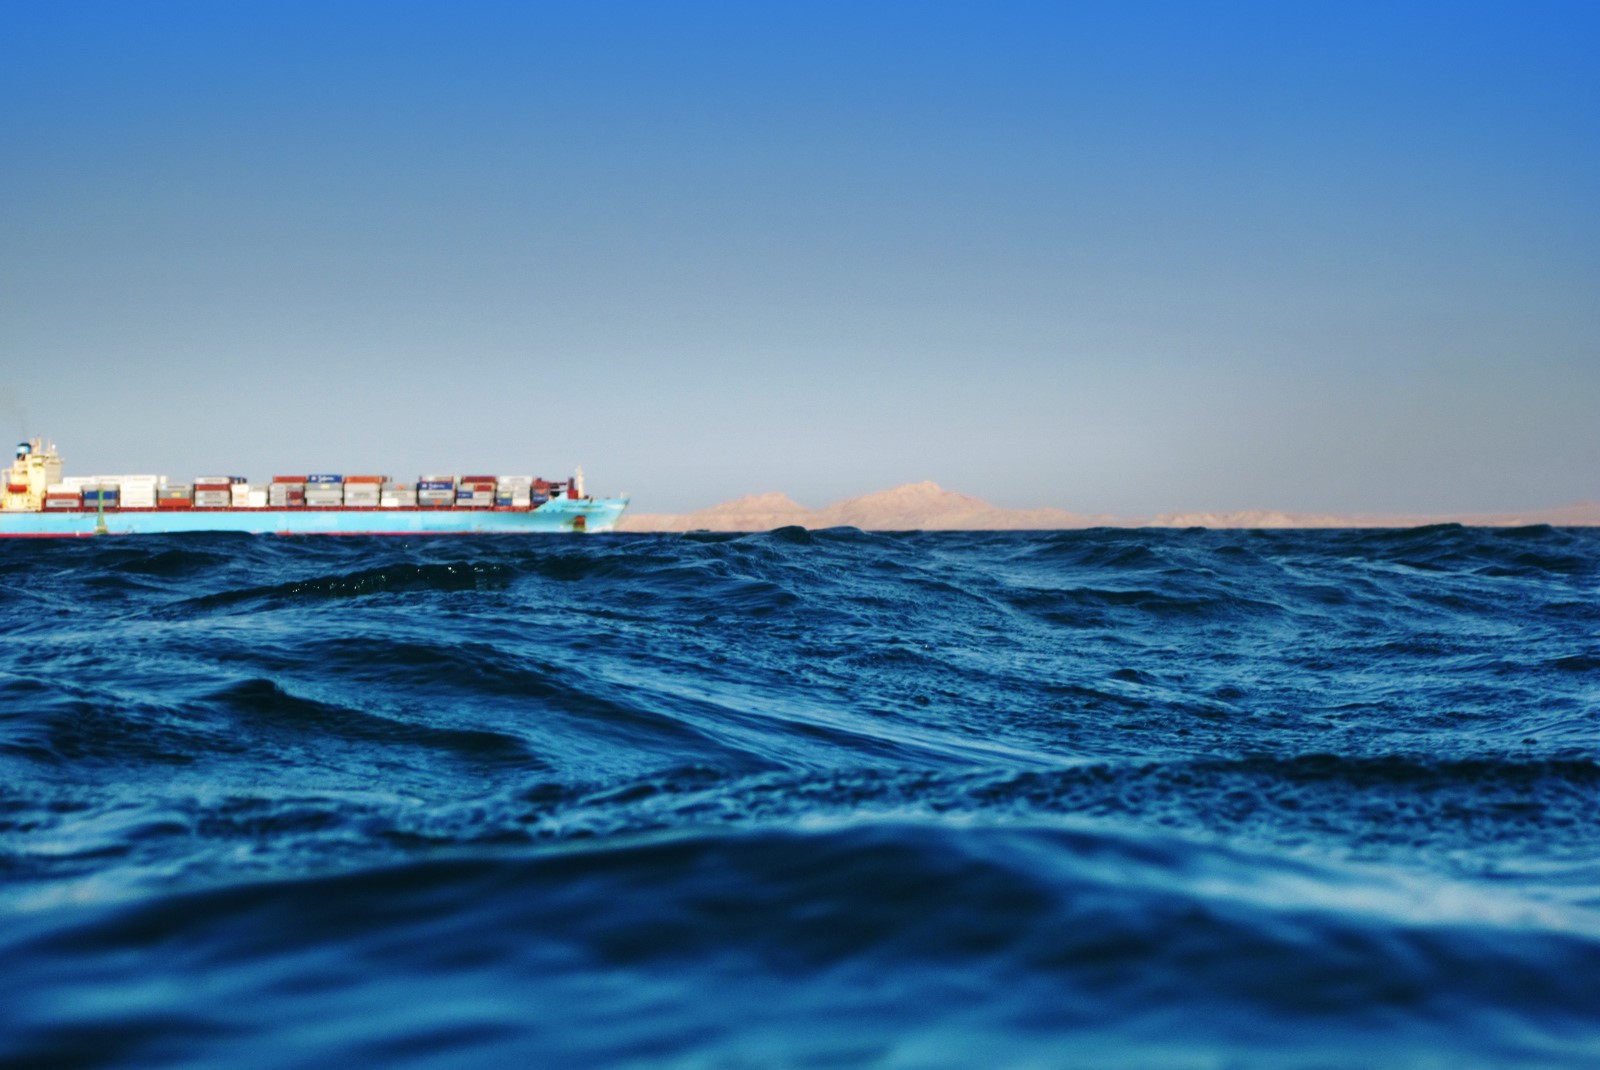 Red sea shipping ship at sea istock brunette 182363319